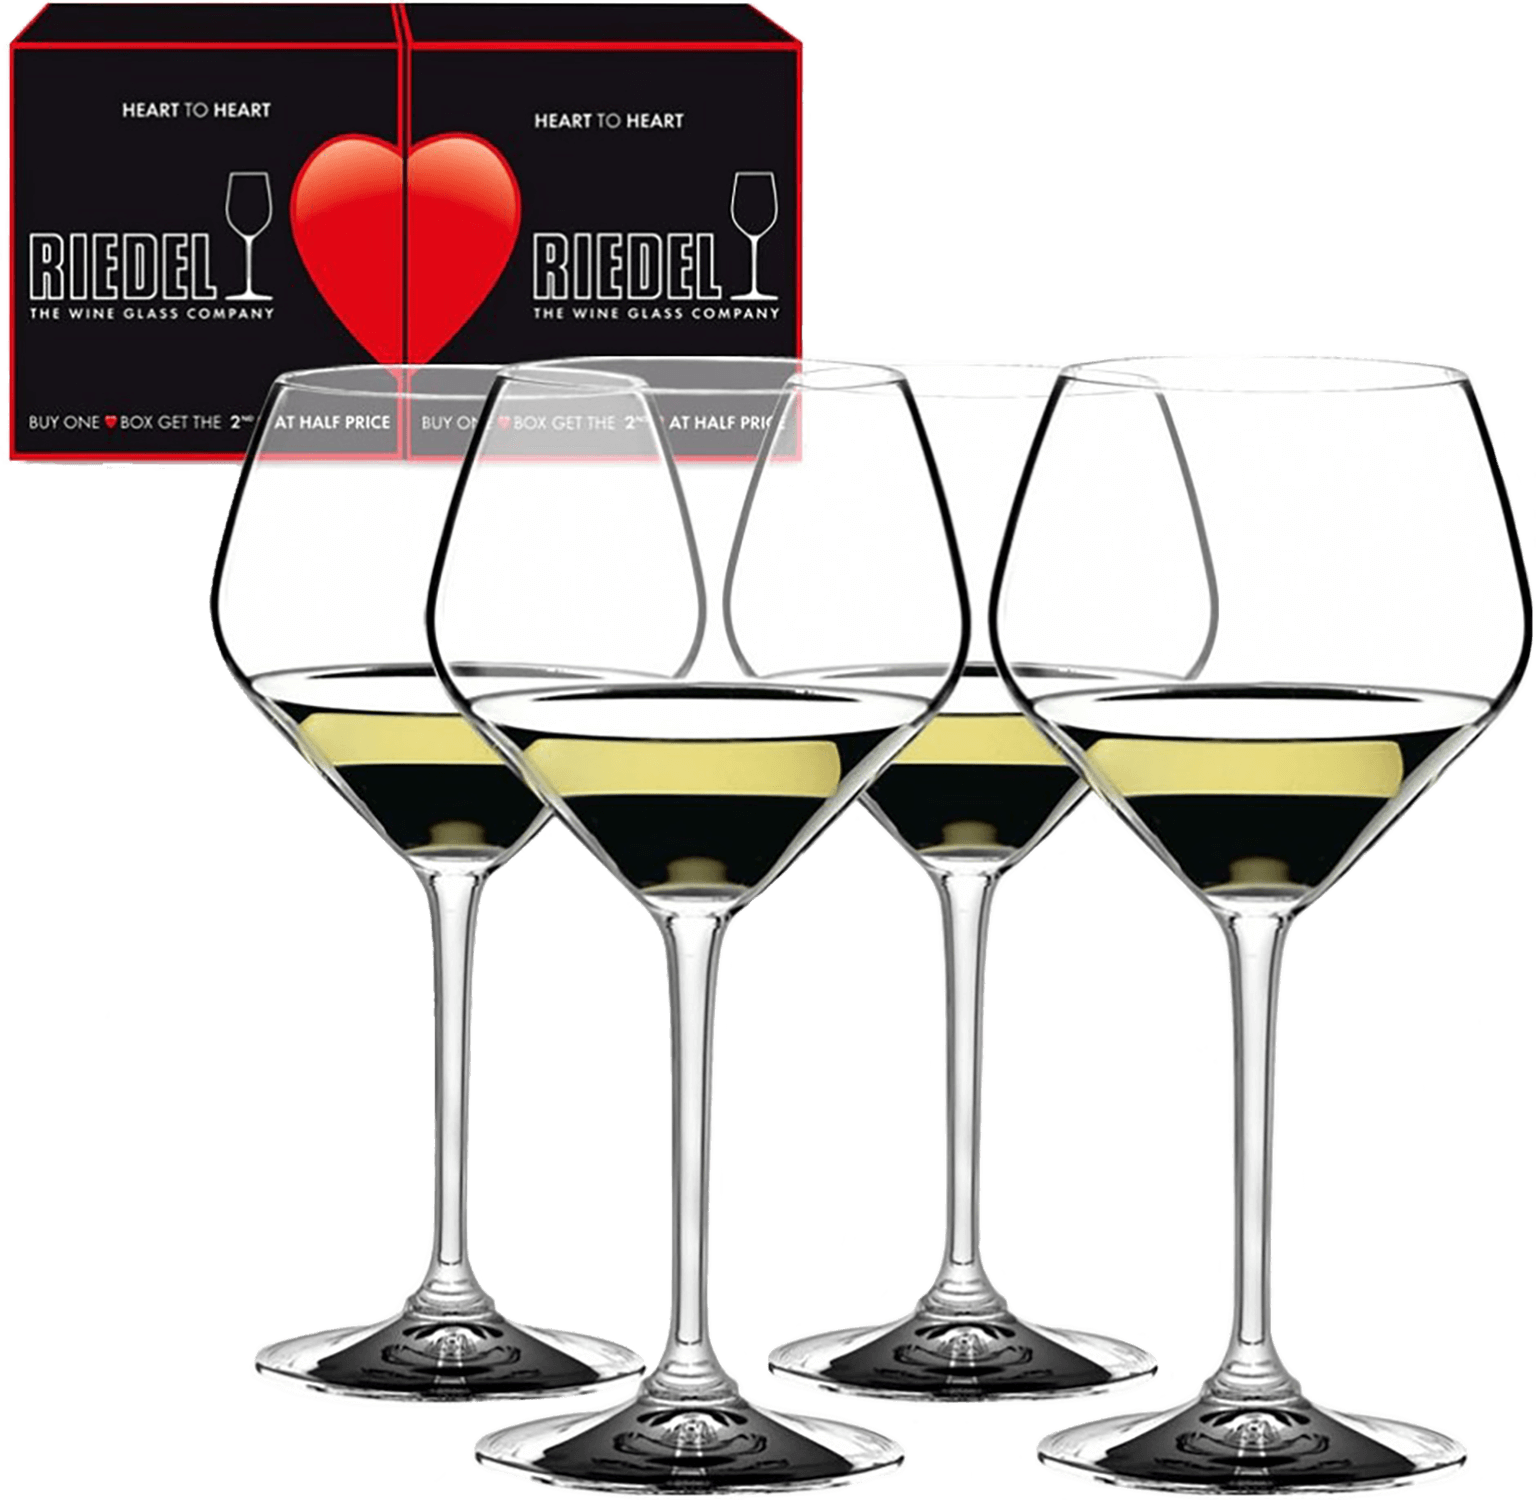 Riedel Heart to Heart Chardonnay (4 glasses set)